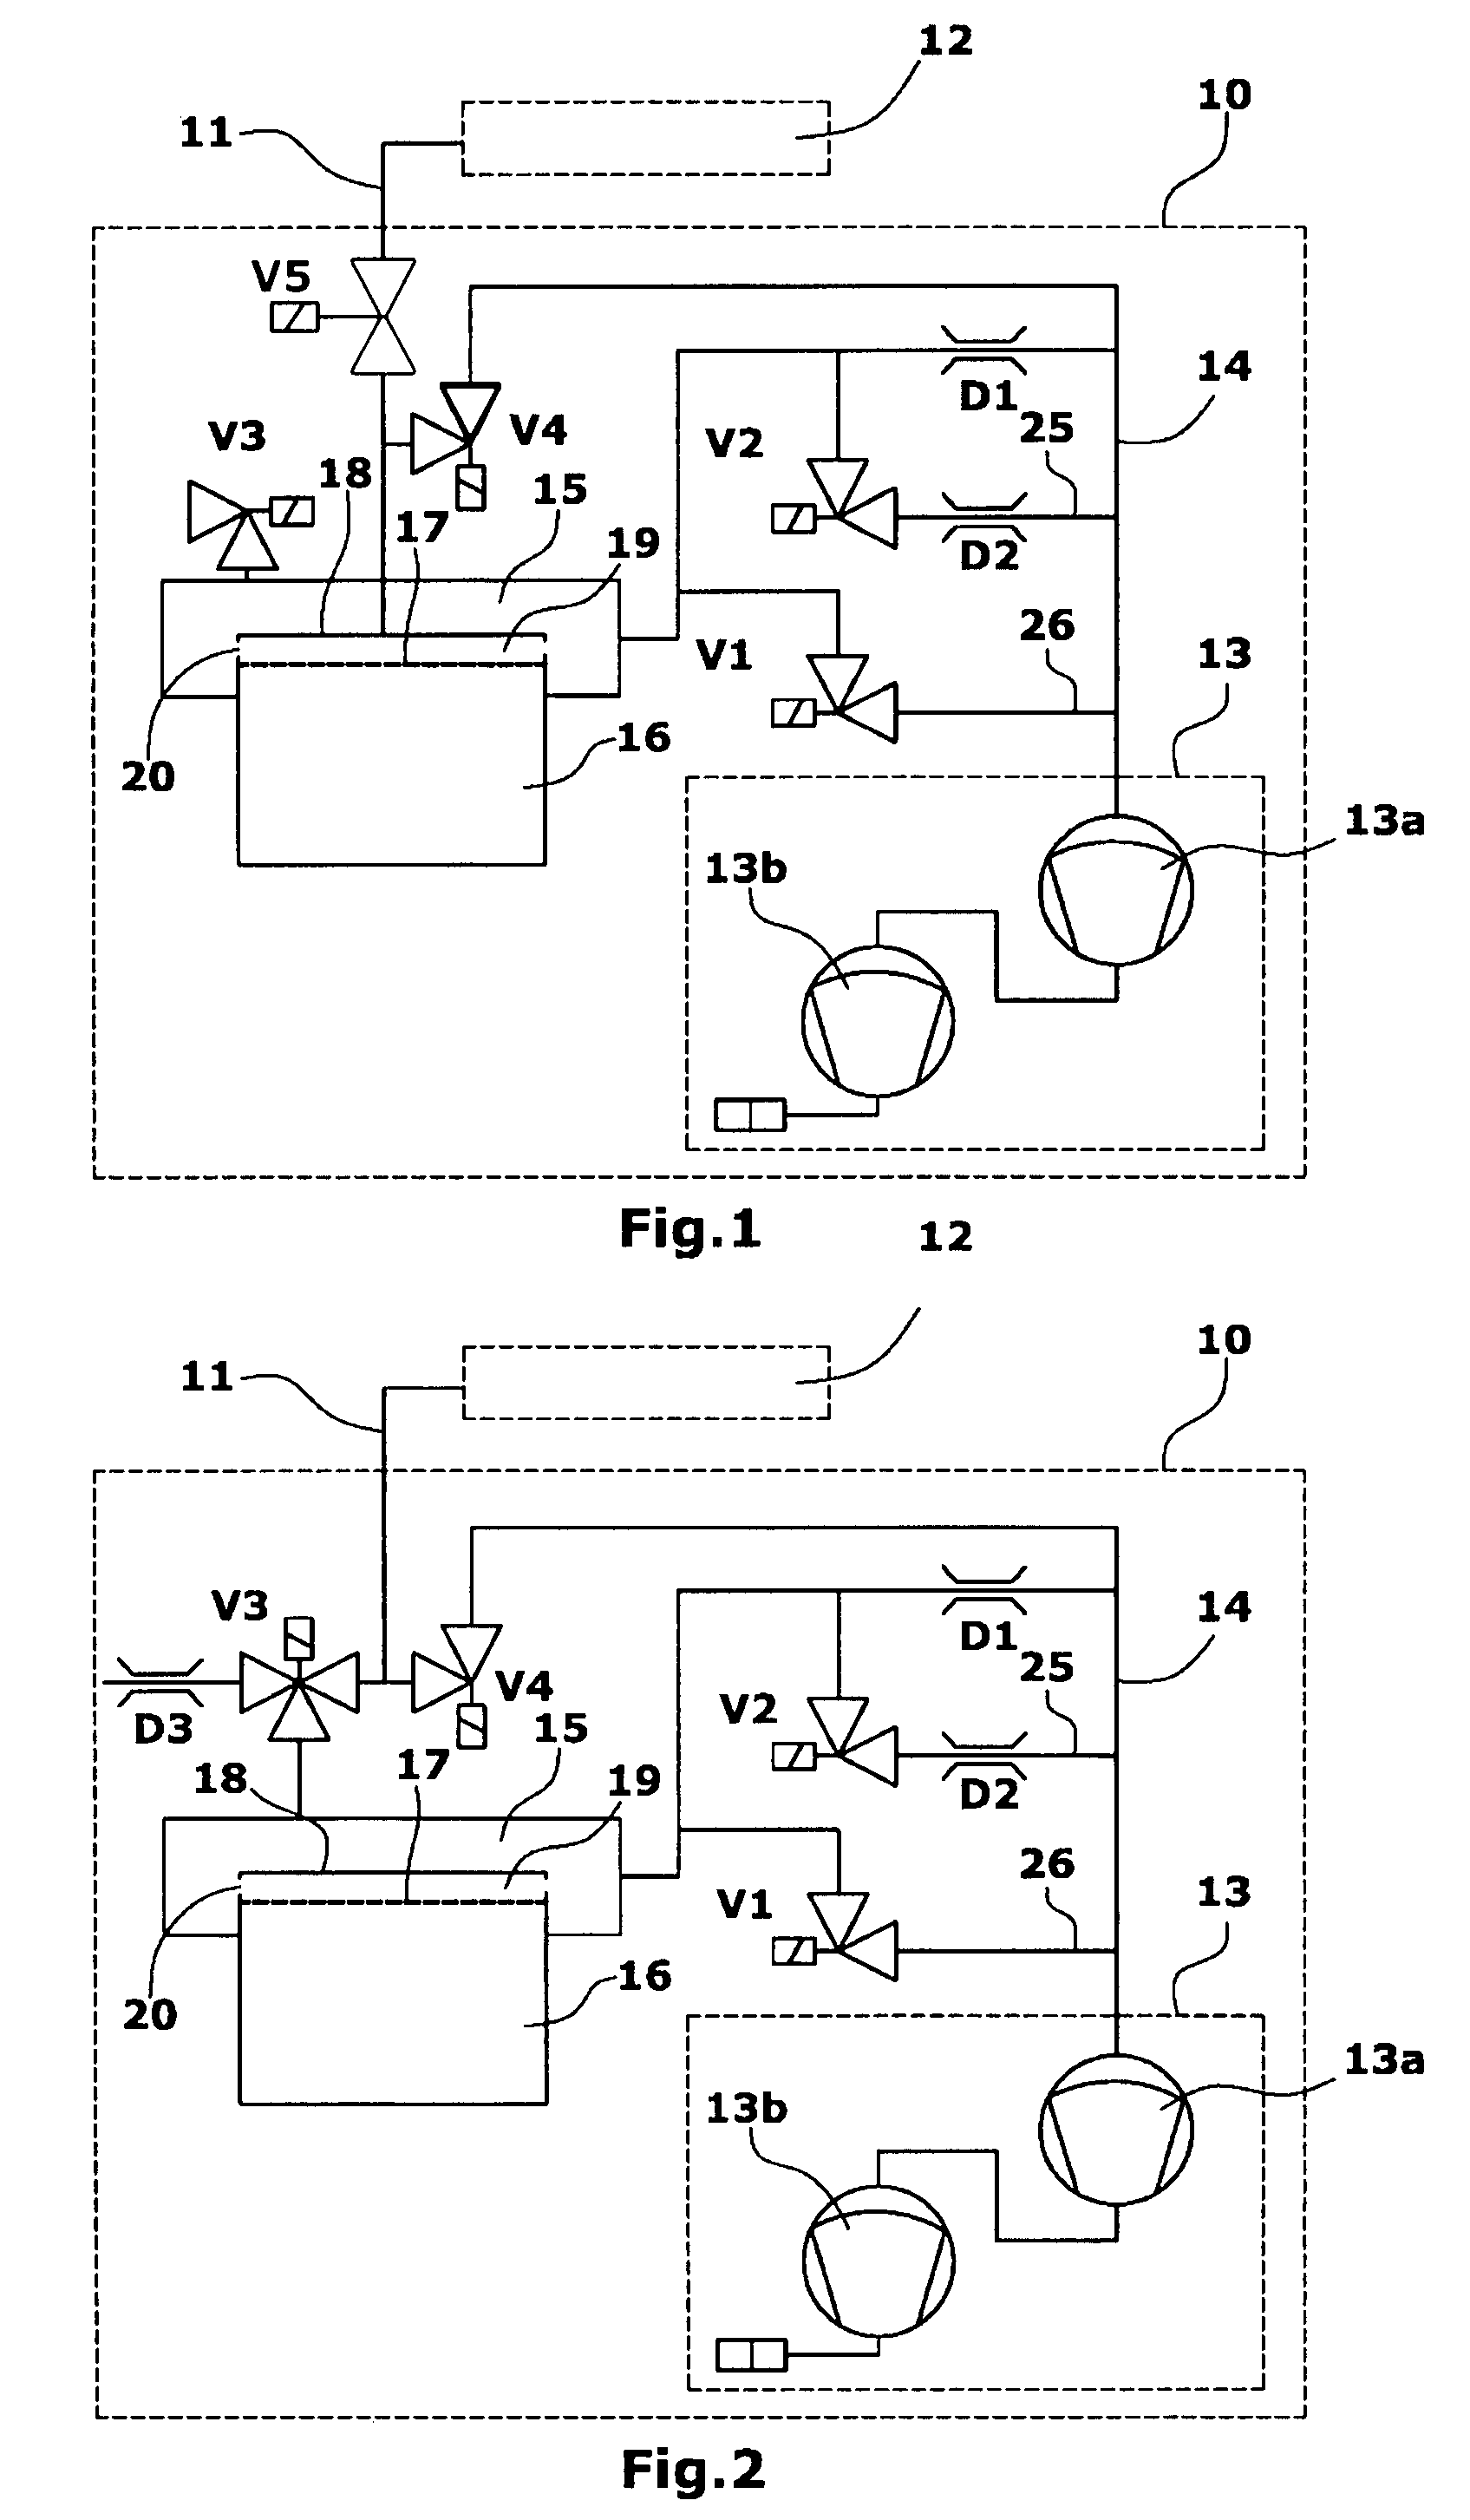 Sniffer lead detector comprising a detector with a quartz window